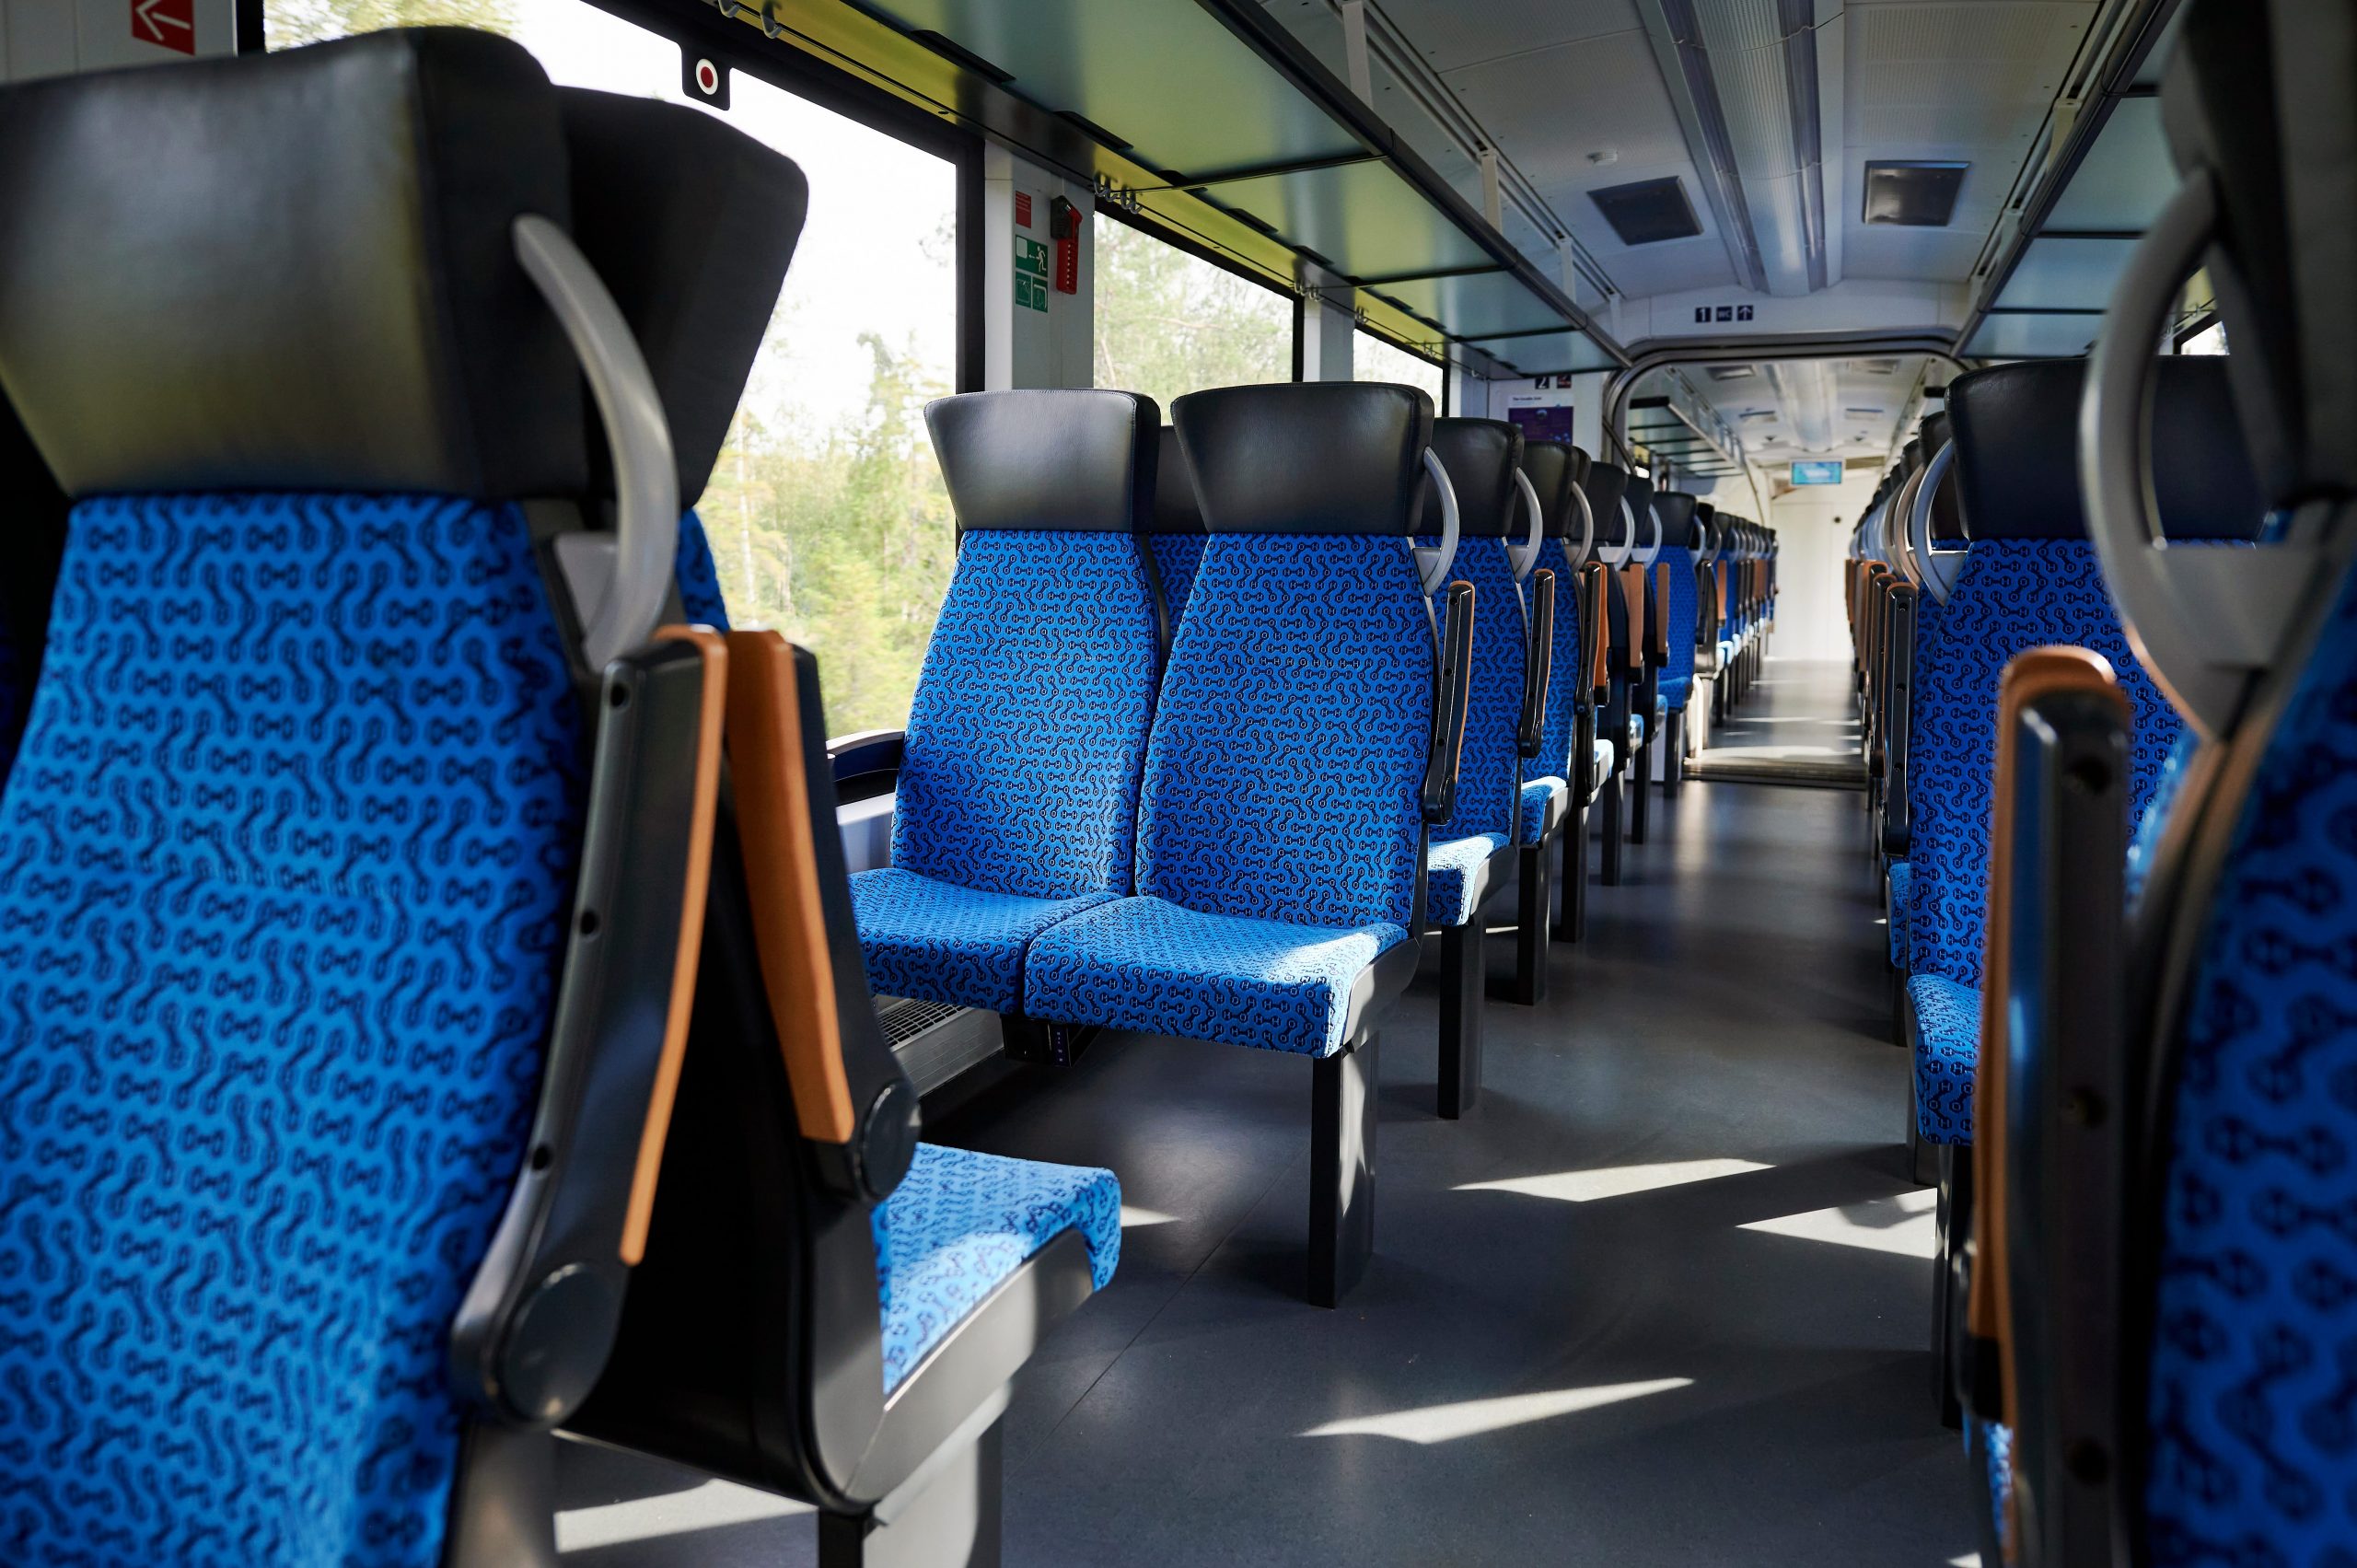 Interior of the hydrogen-powered train